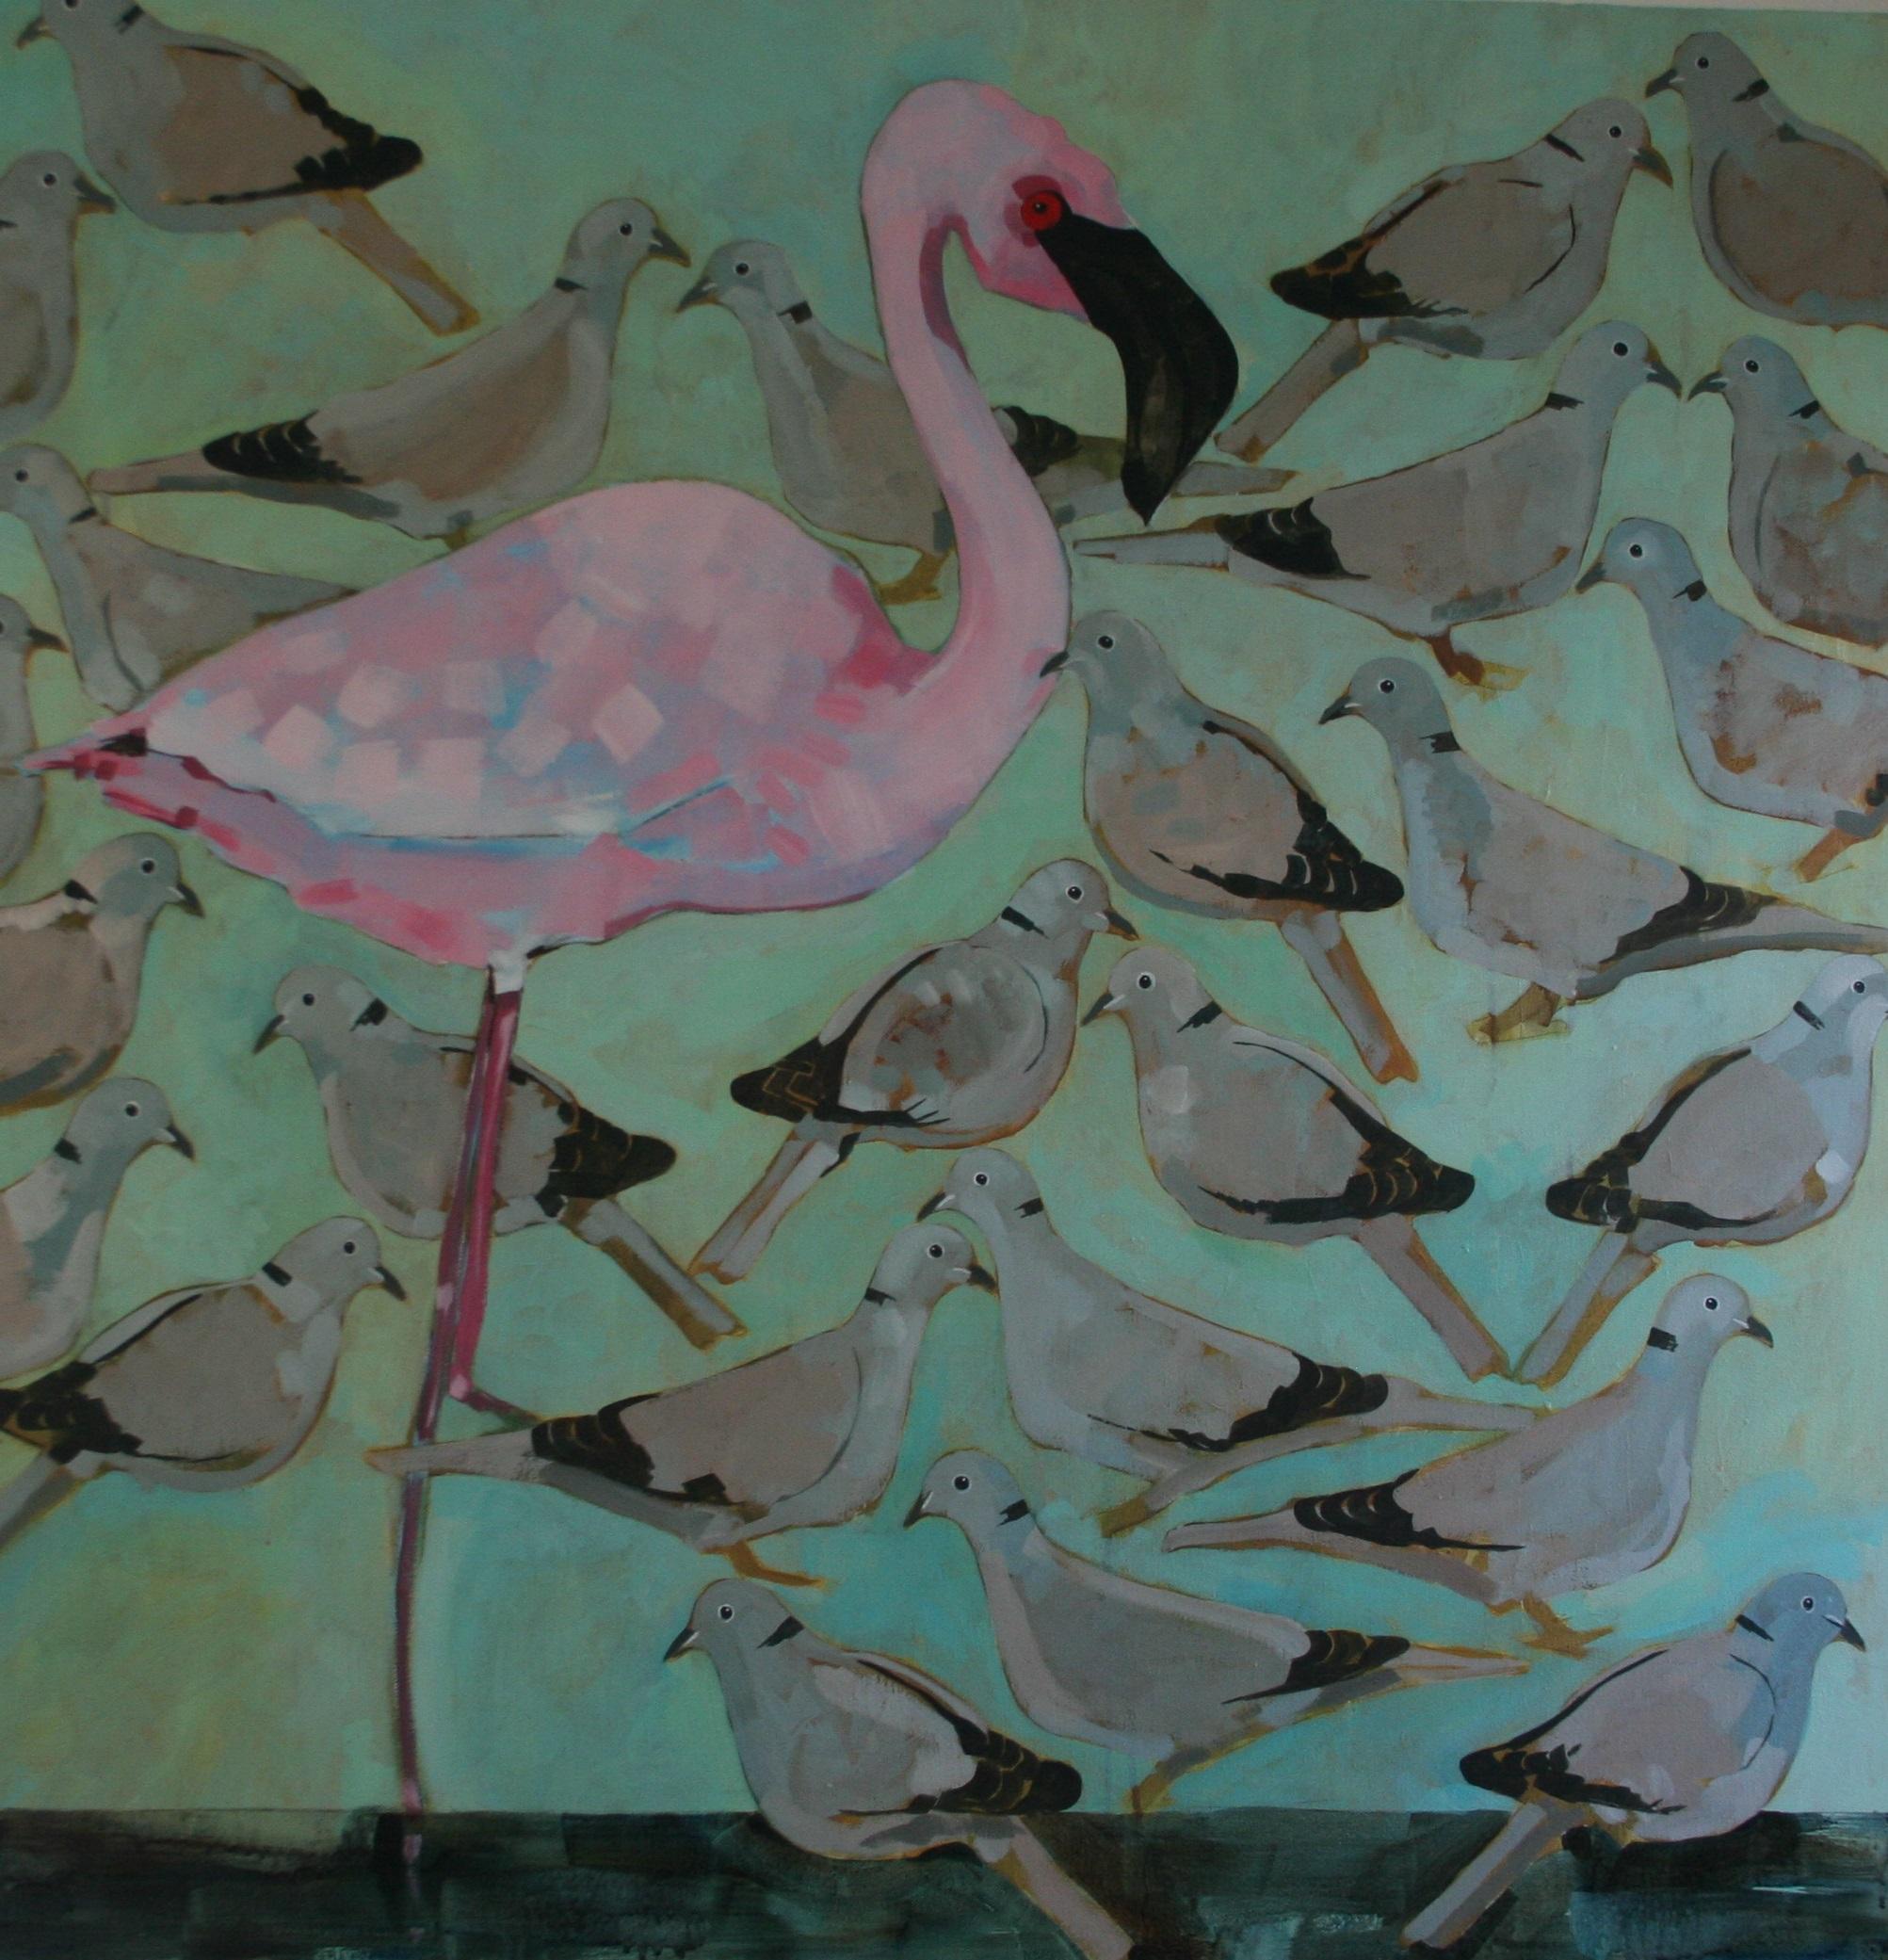 Study in Pink and Grey - contemporary Flamenco pigeons birds acrylic painting